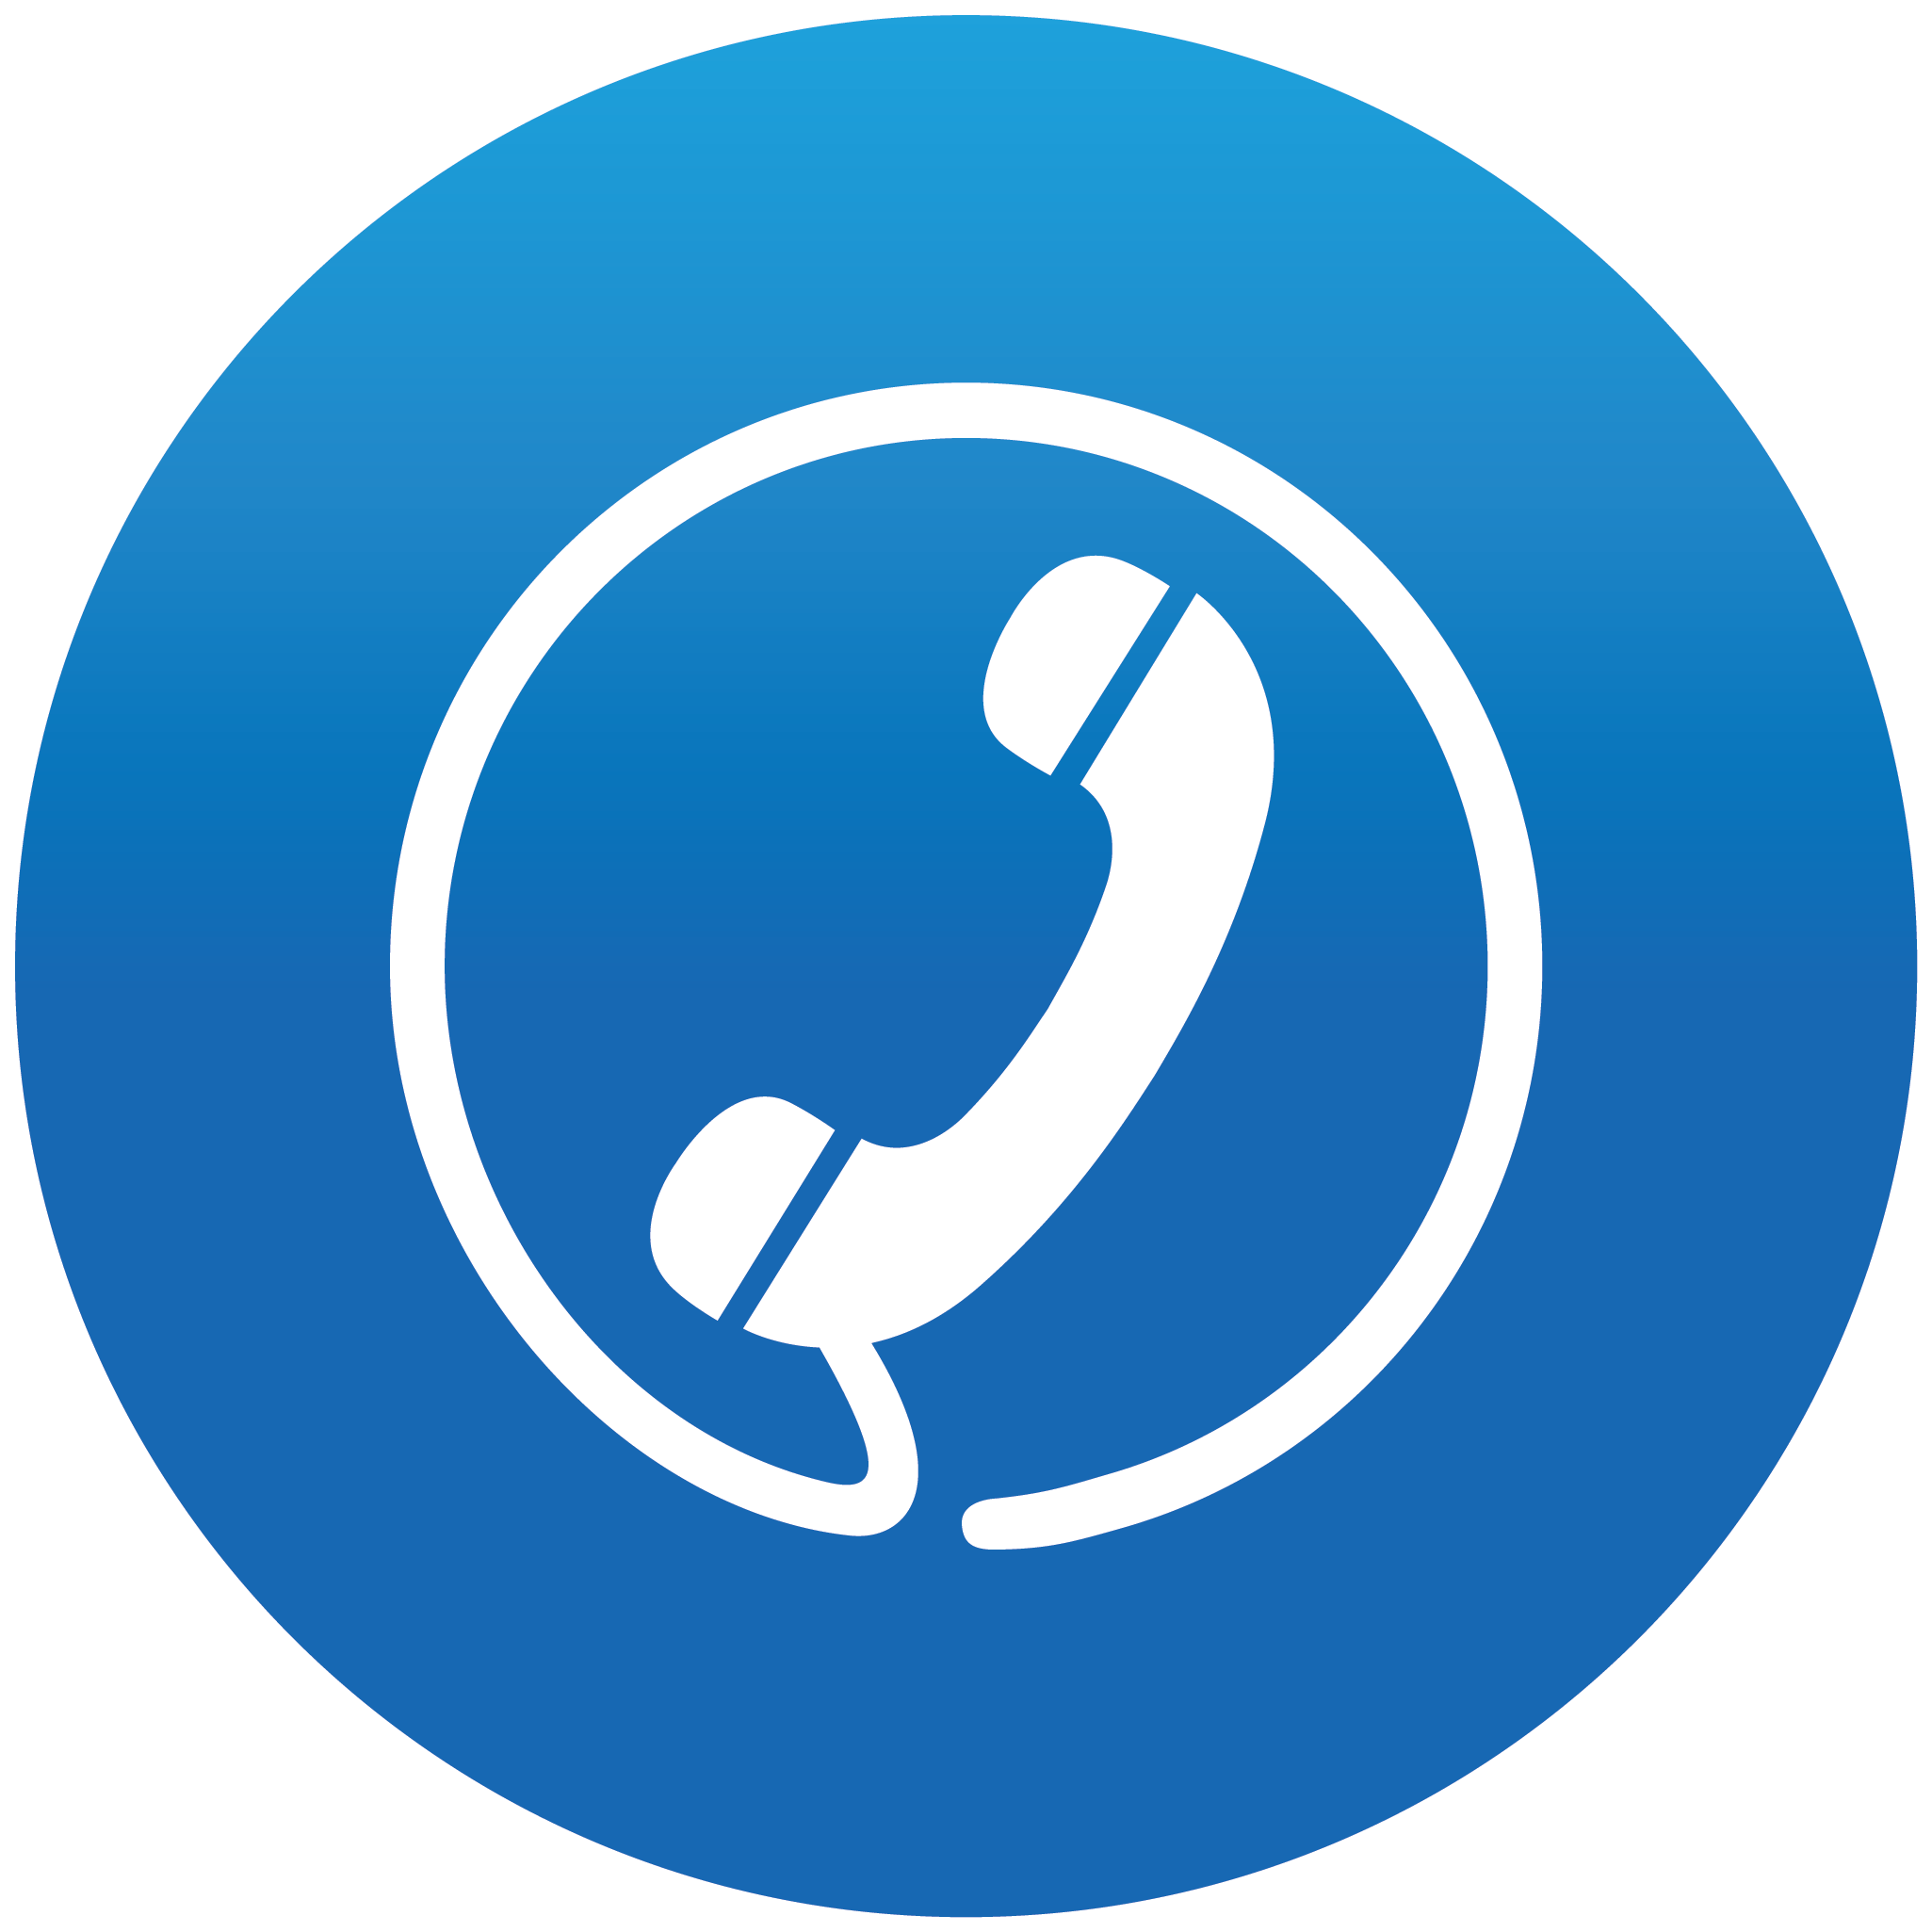 Telephone icon blue gradient #3616 - Free Icons and PNG Backgrounds